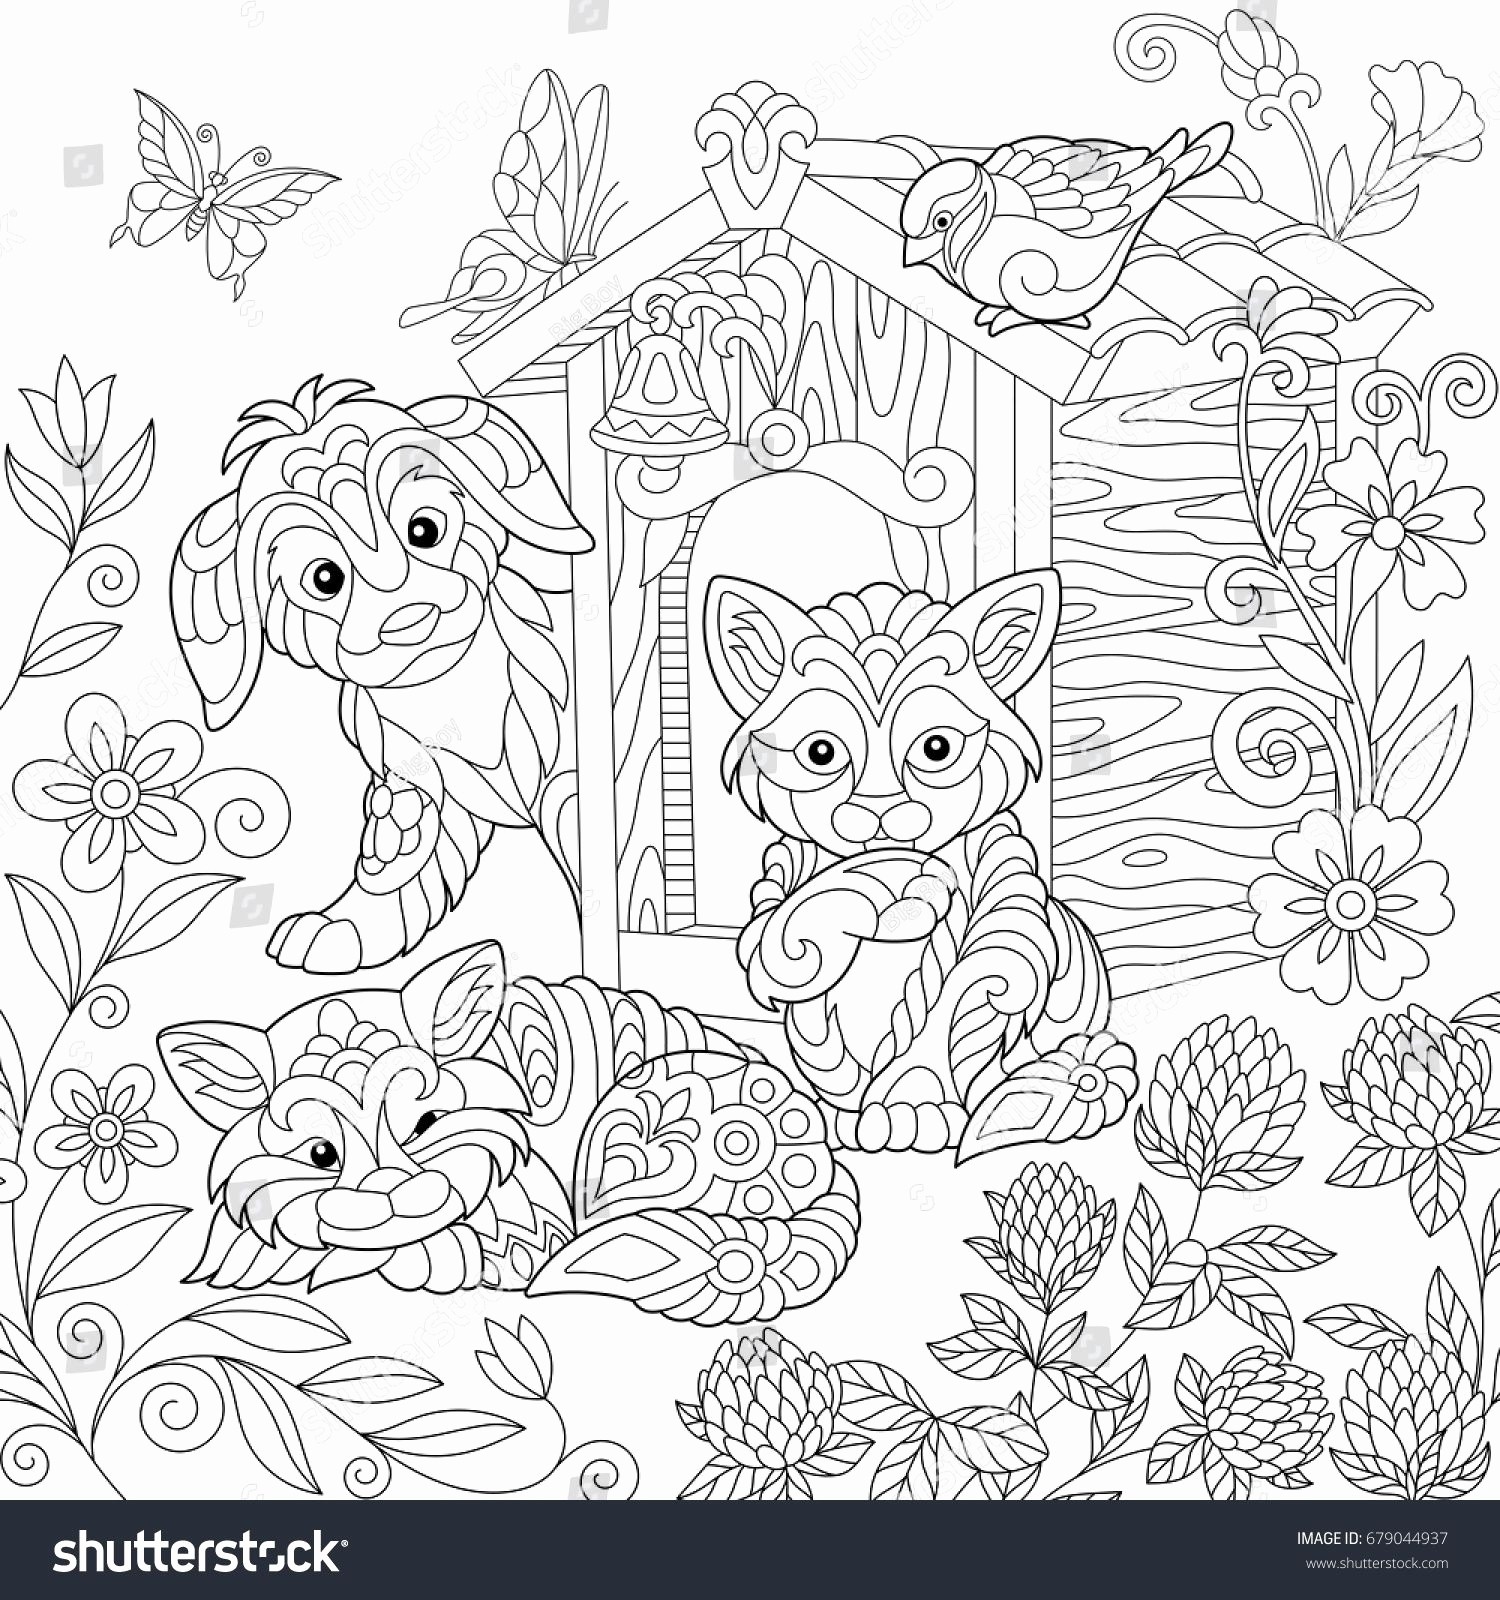 halloween cat coloring pages 28r halloween cat coloring pages beautiful best od dog coloring pages free colouring pages